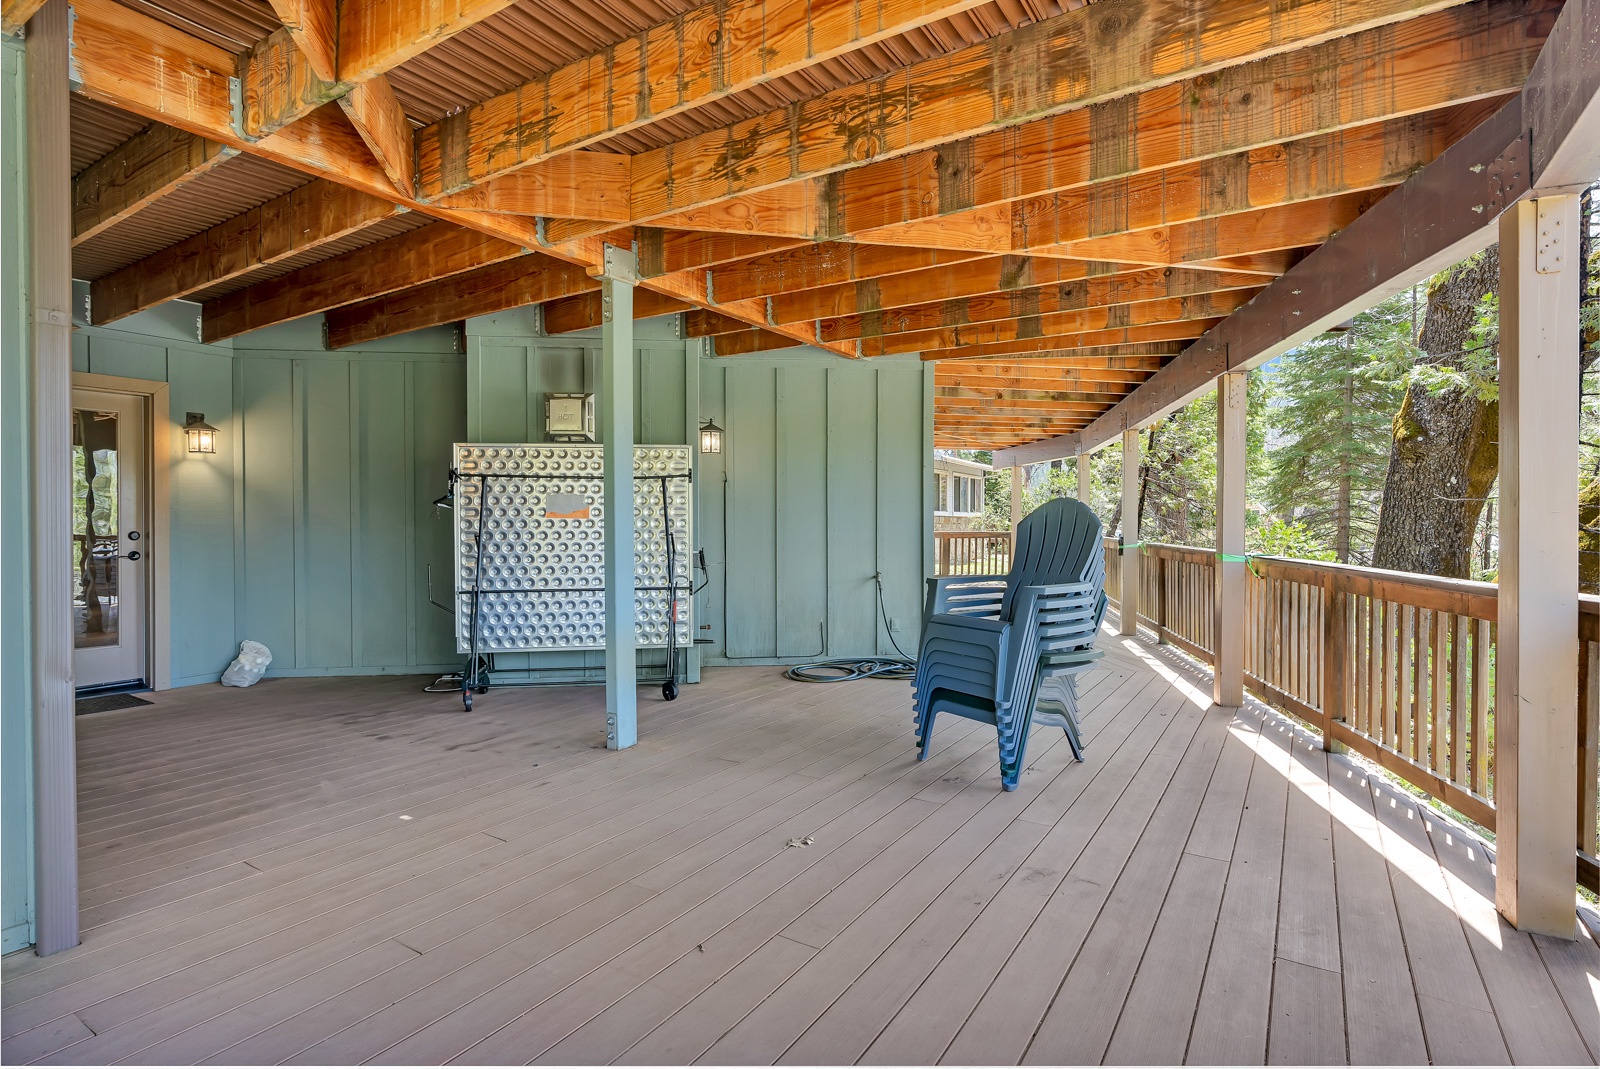 The wraparound lower-level deck is a great place to take in the fresh air